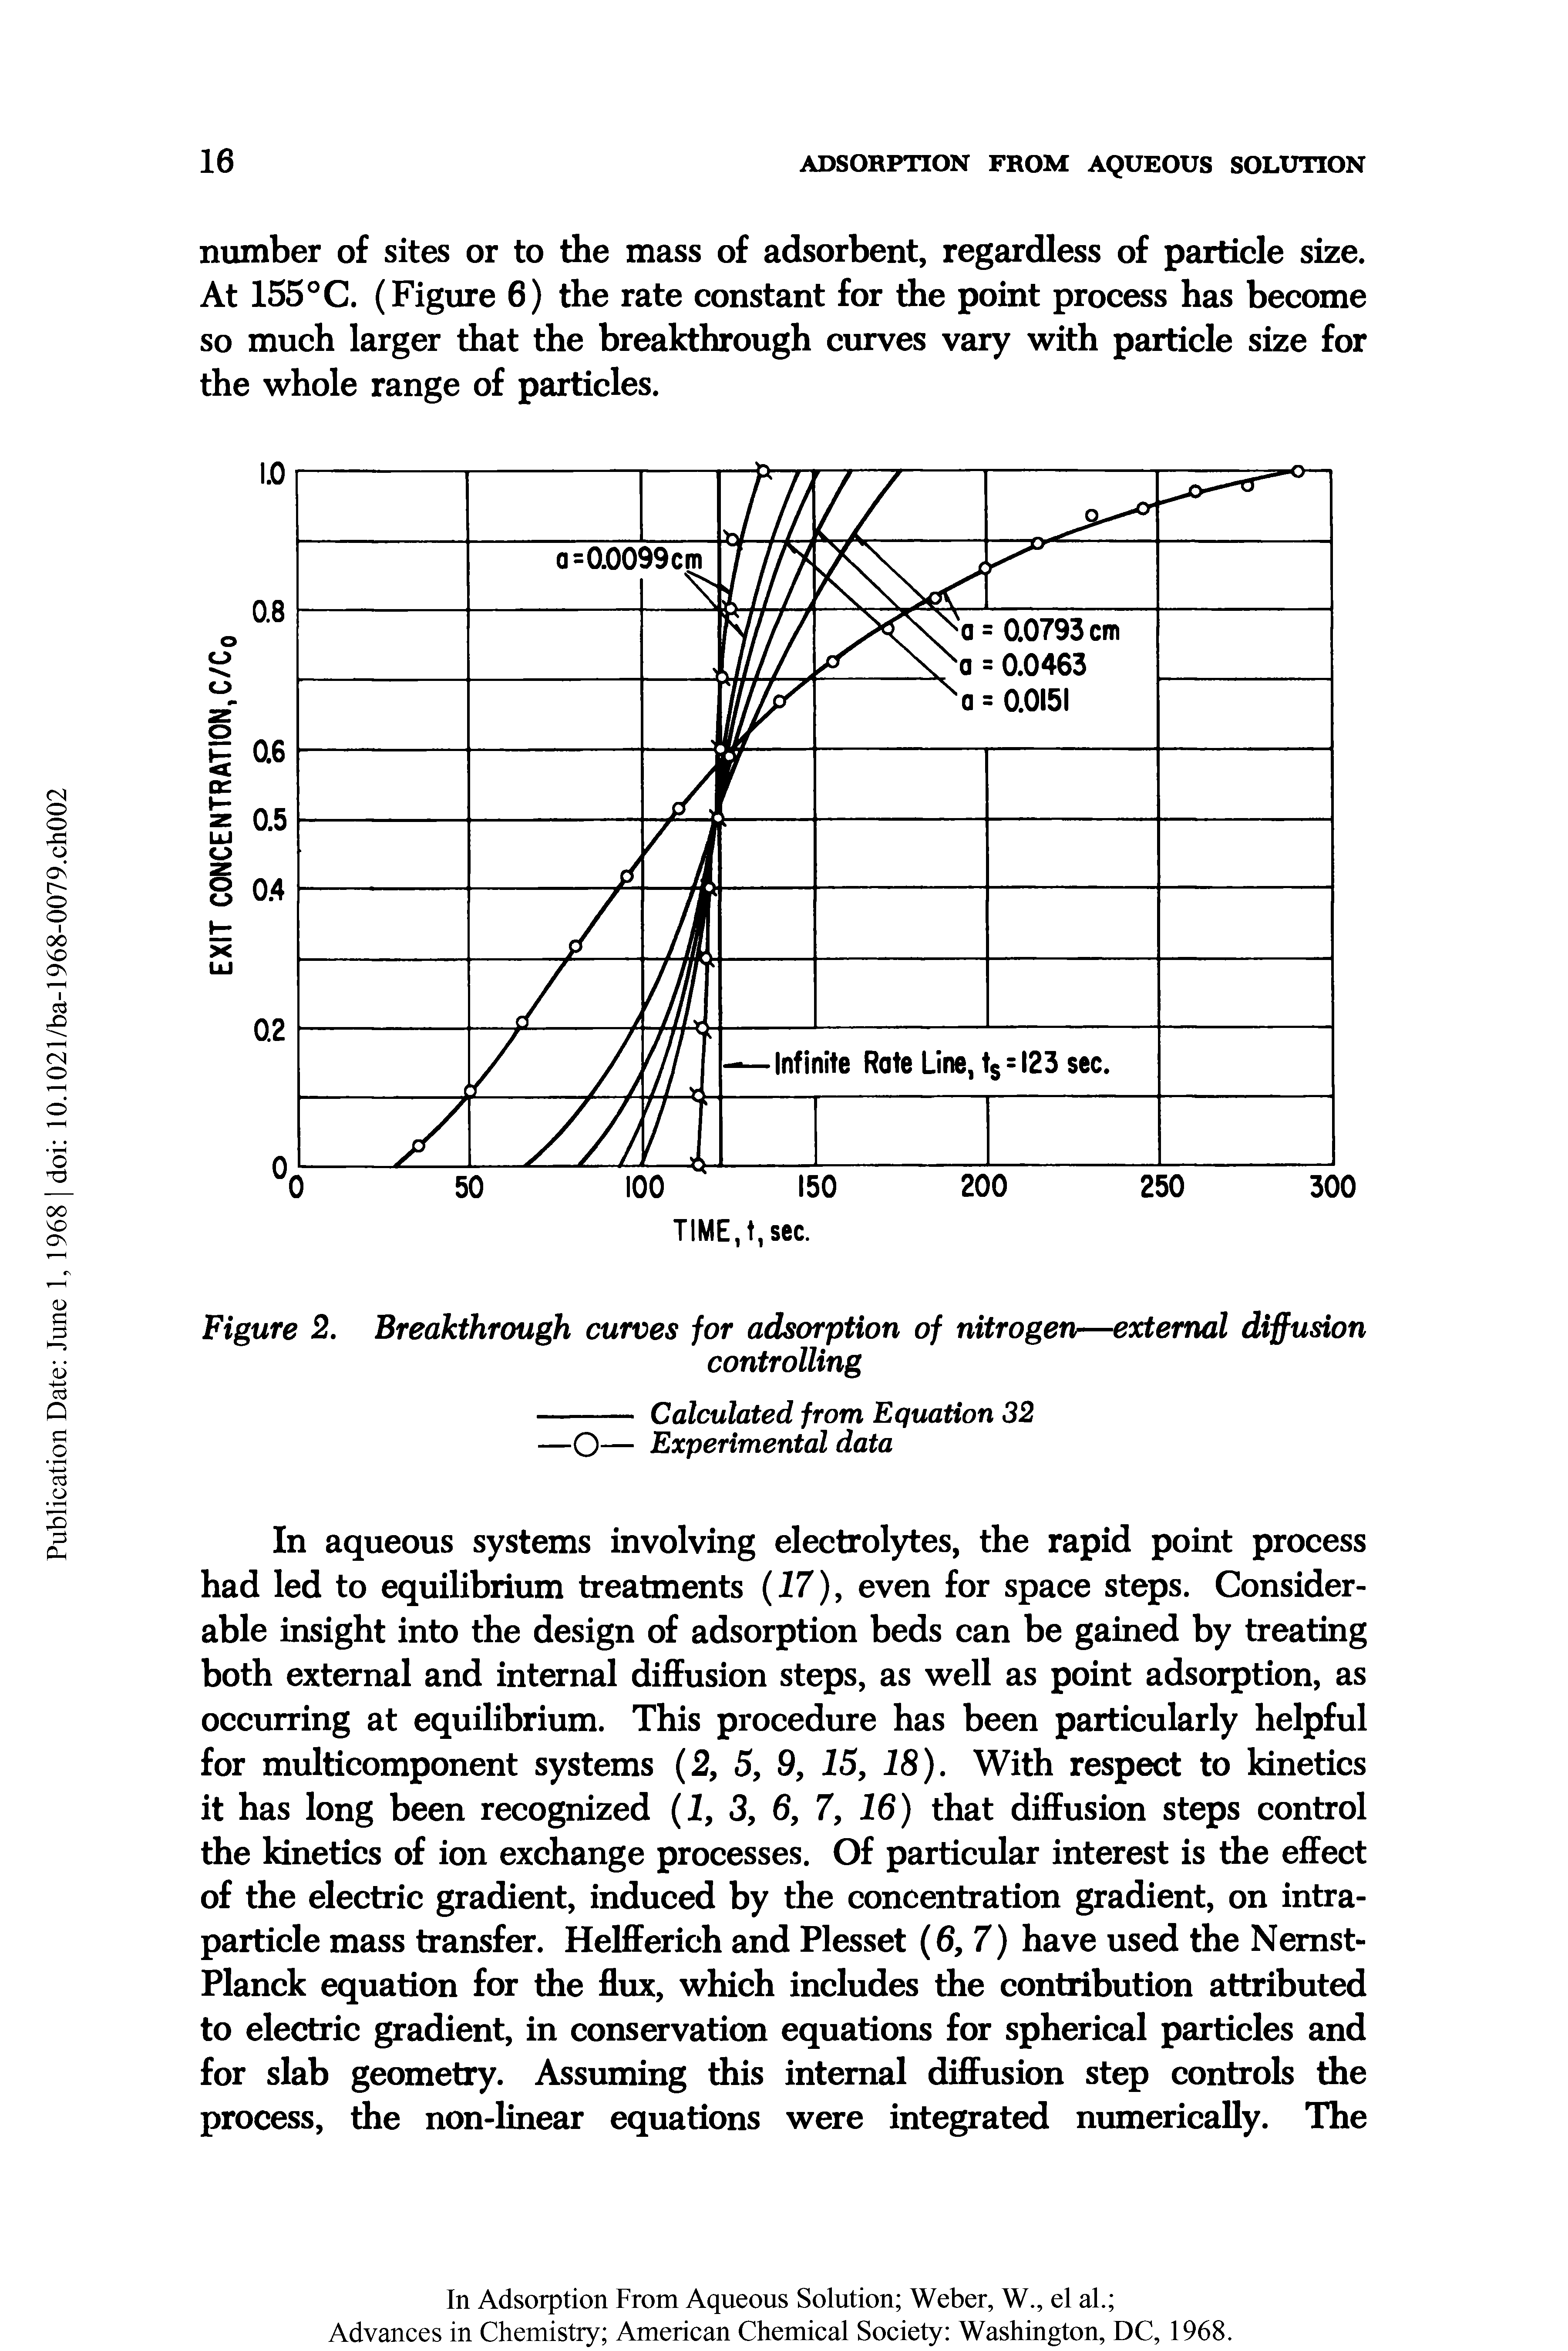 Figure 2. Breakthrough curves for adsorption of nitrogen—external diffusion...